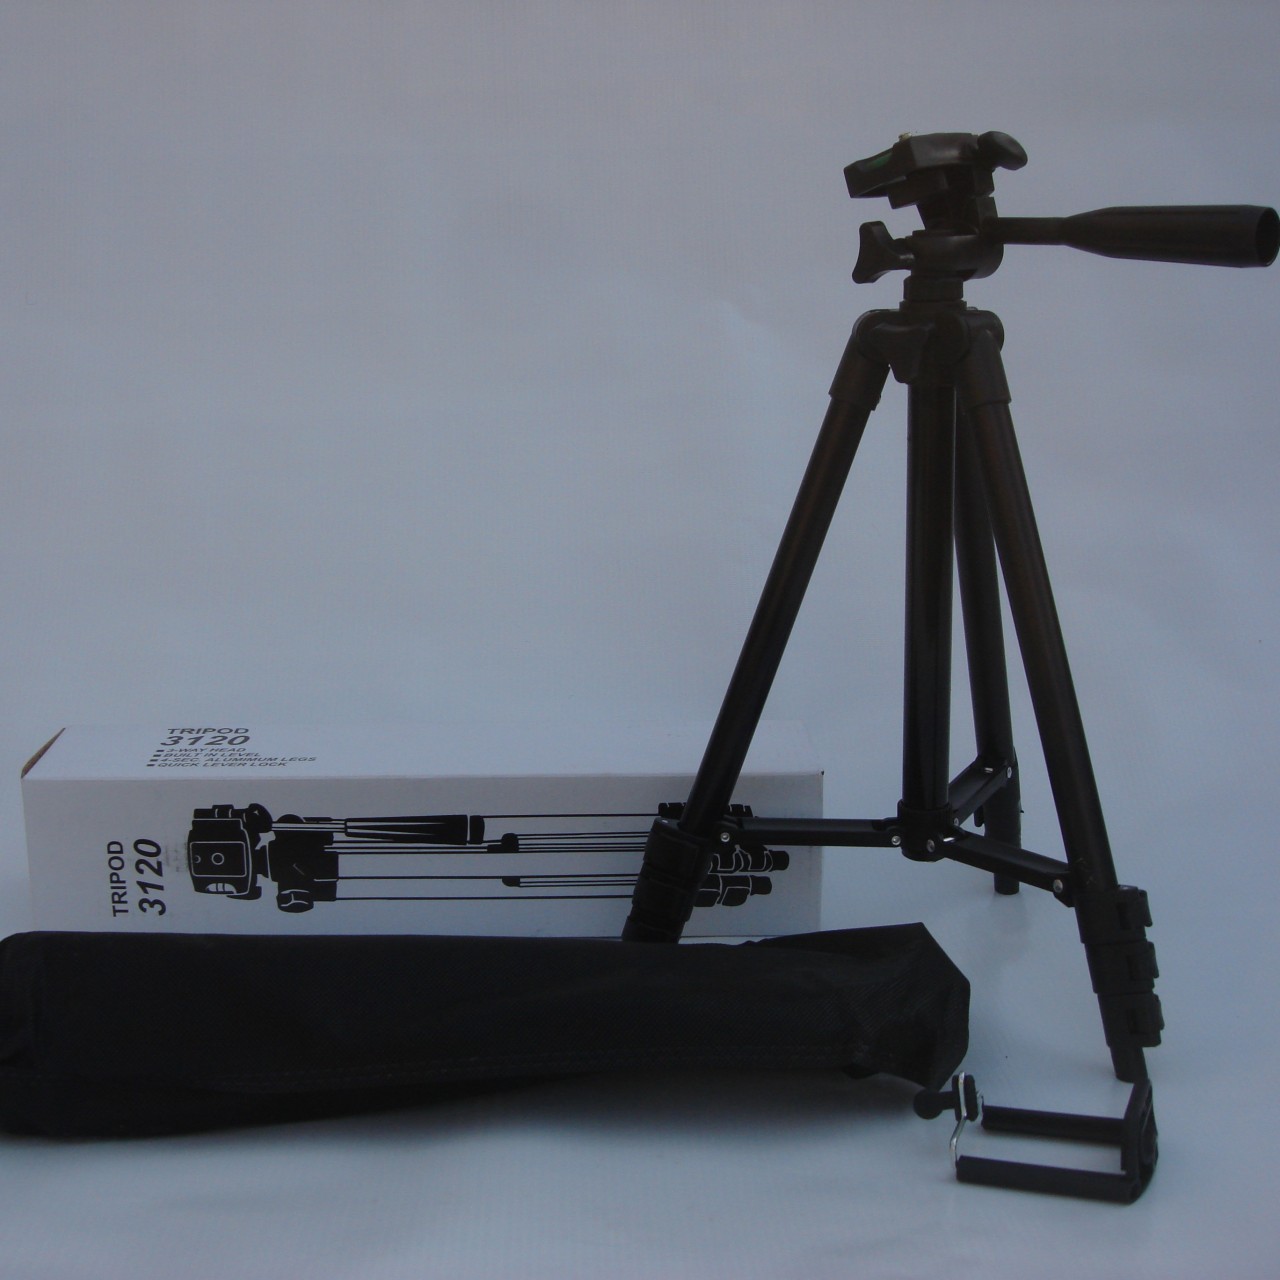 3120 Tripod stand for mobile and camera both (Original pictures shown)